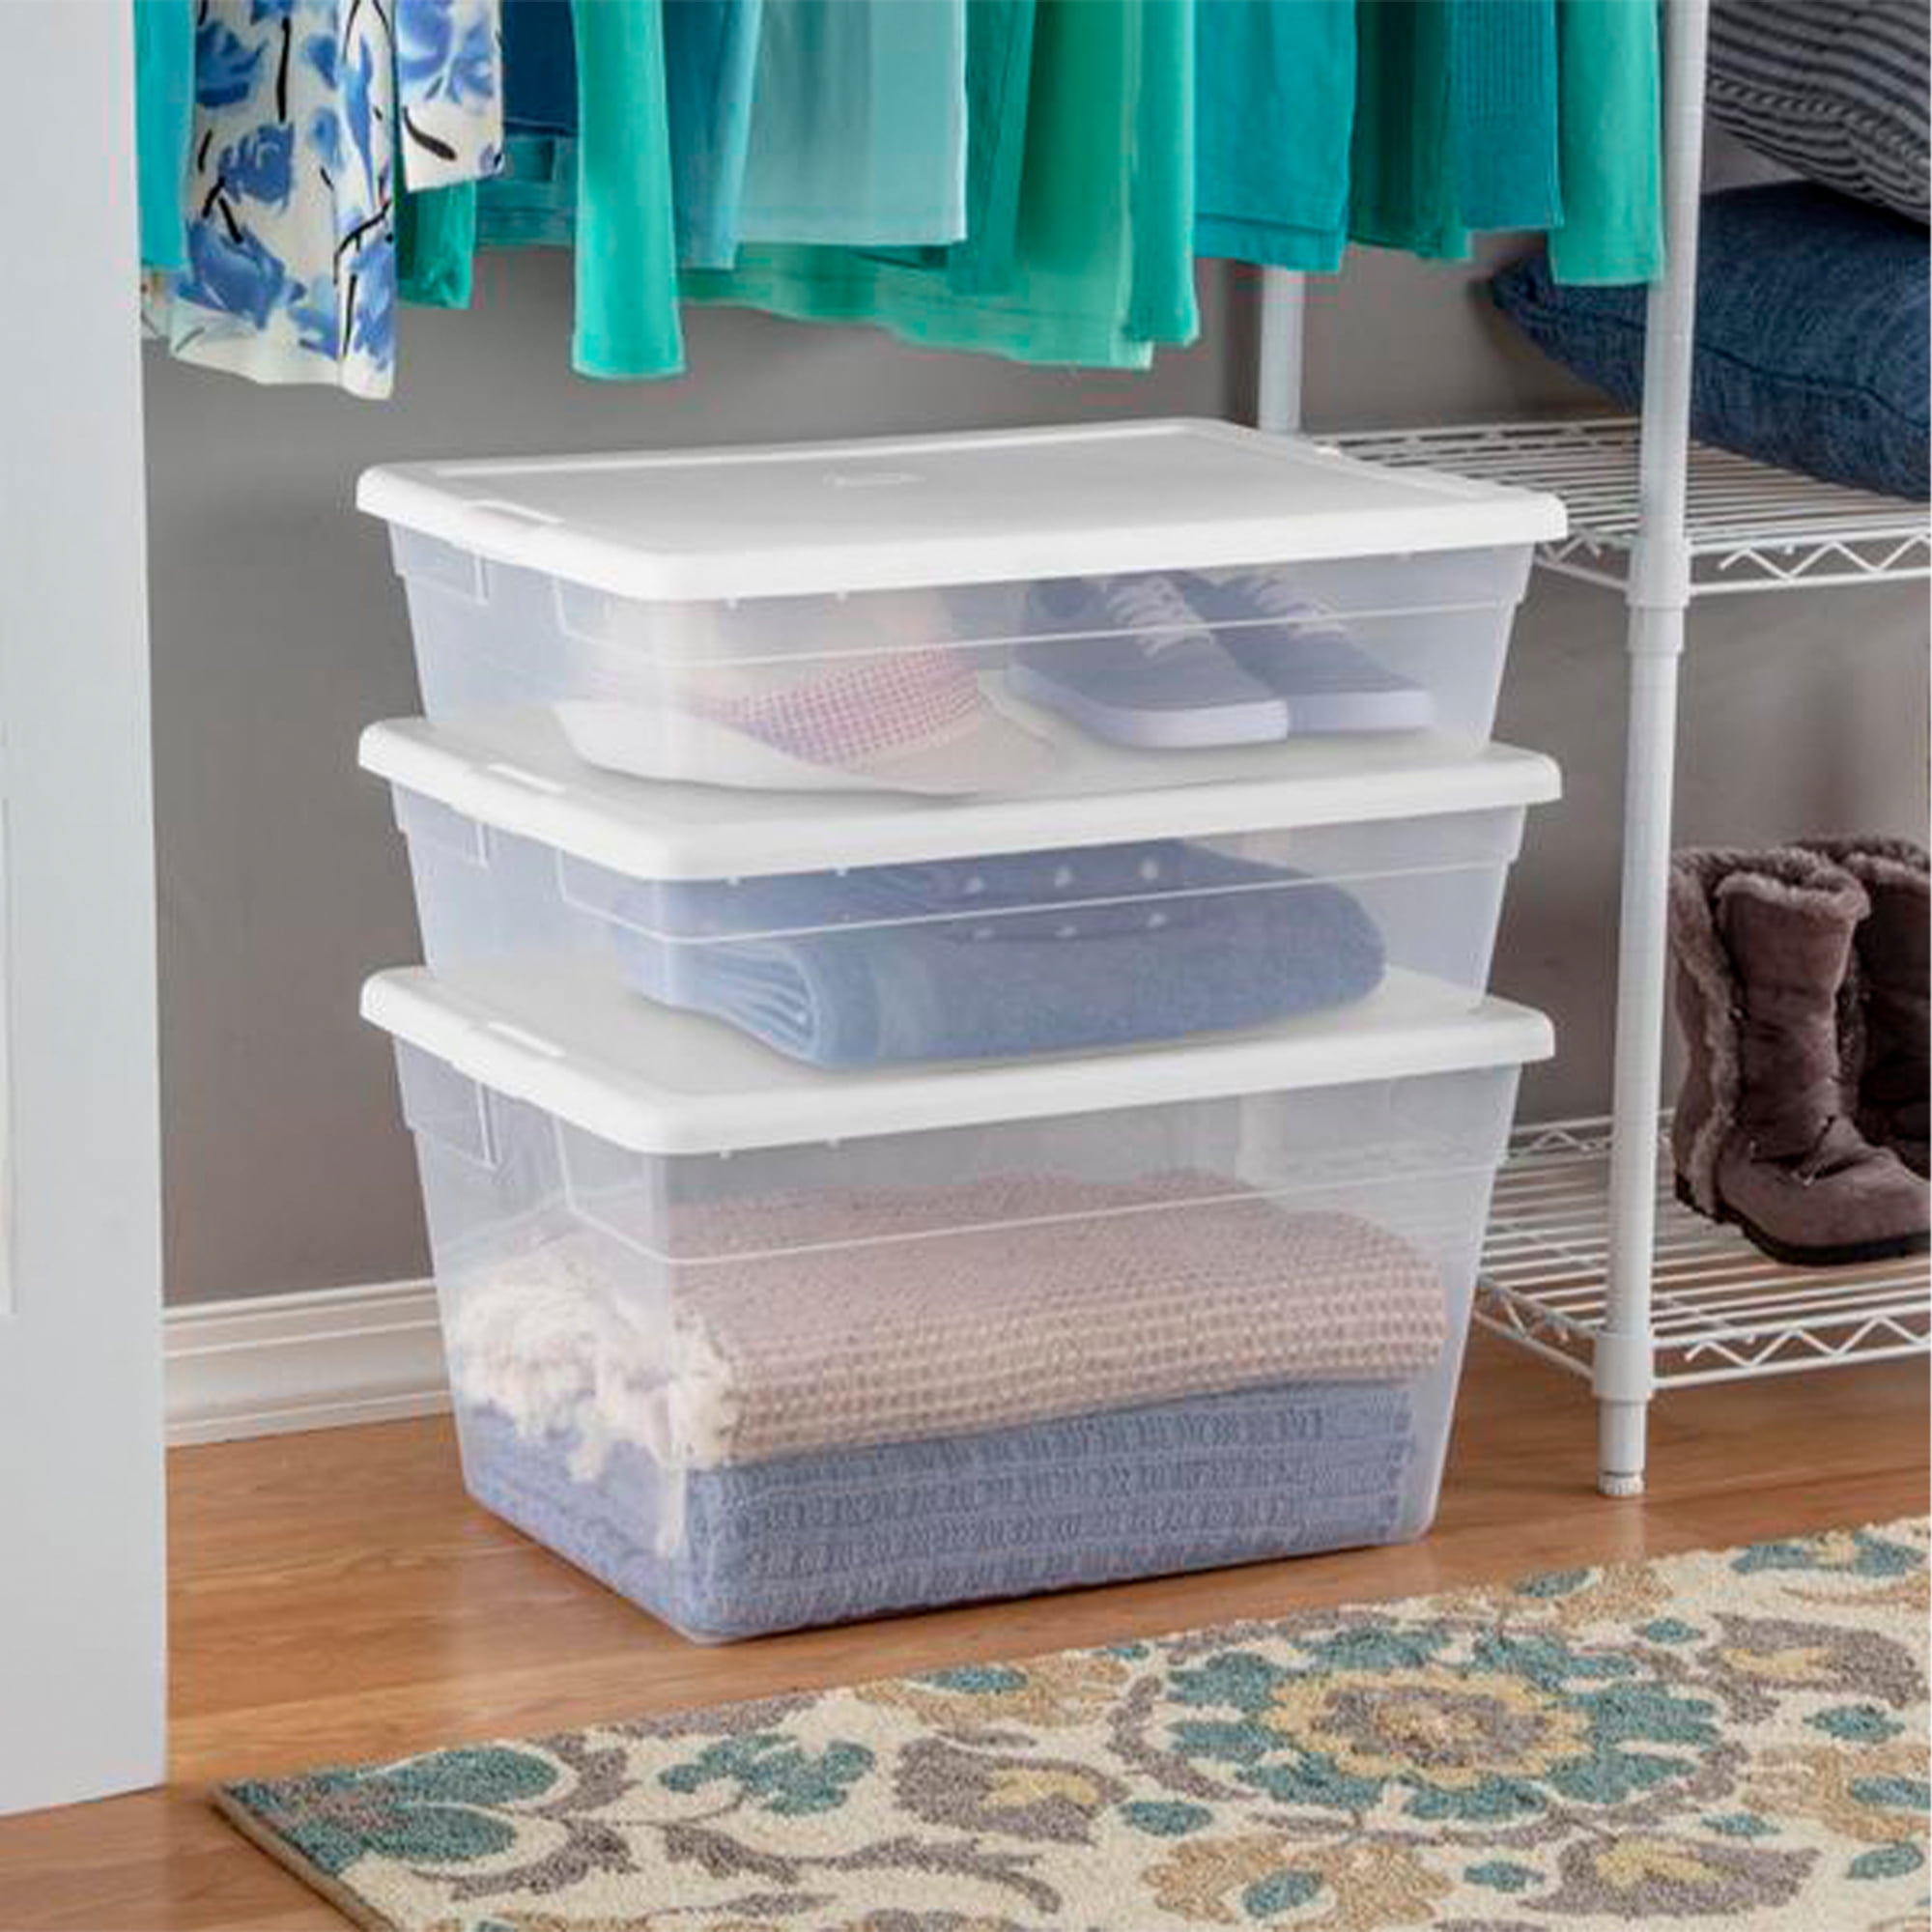 10 Gal. Underbed Storage Organizer Tote in Teal 7421TL - The Home Depot